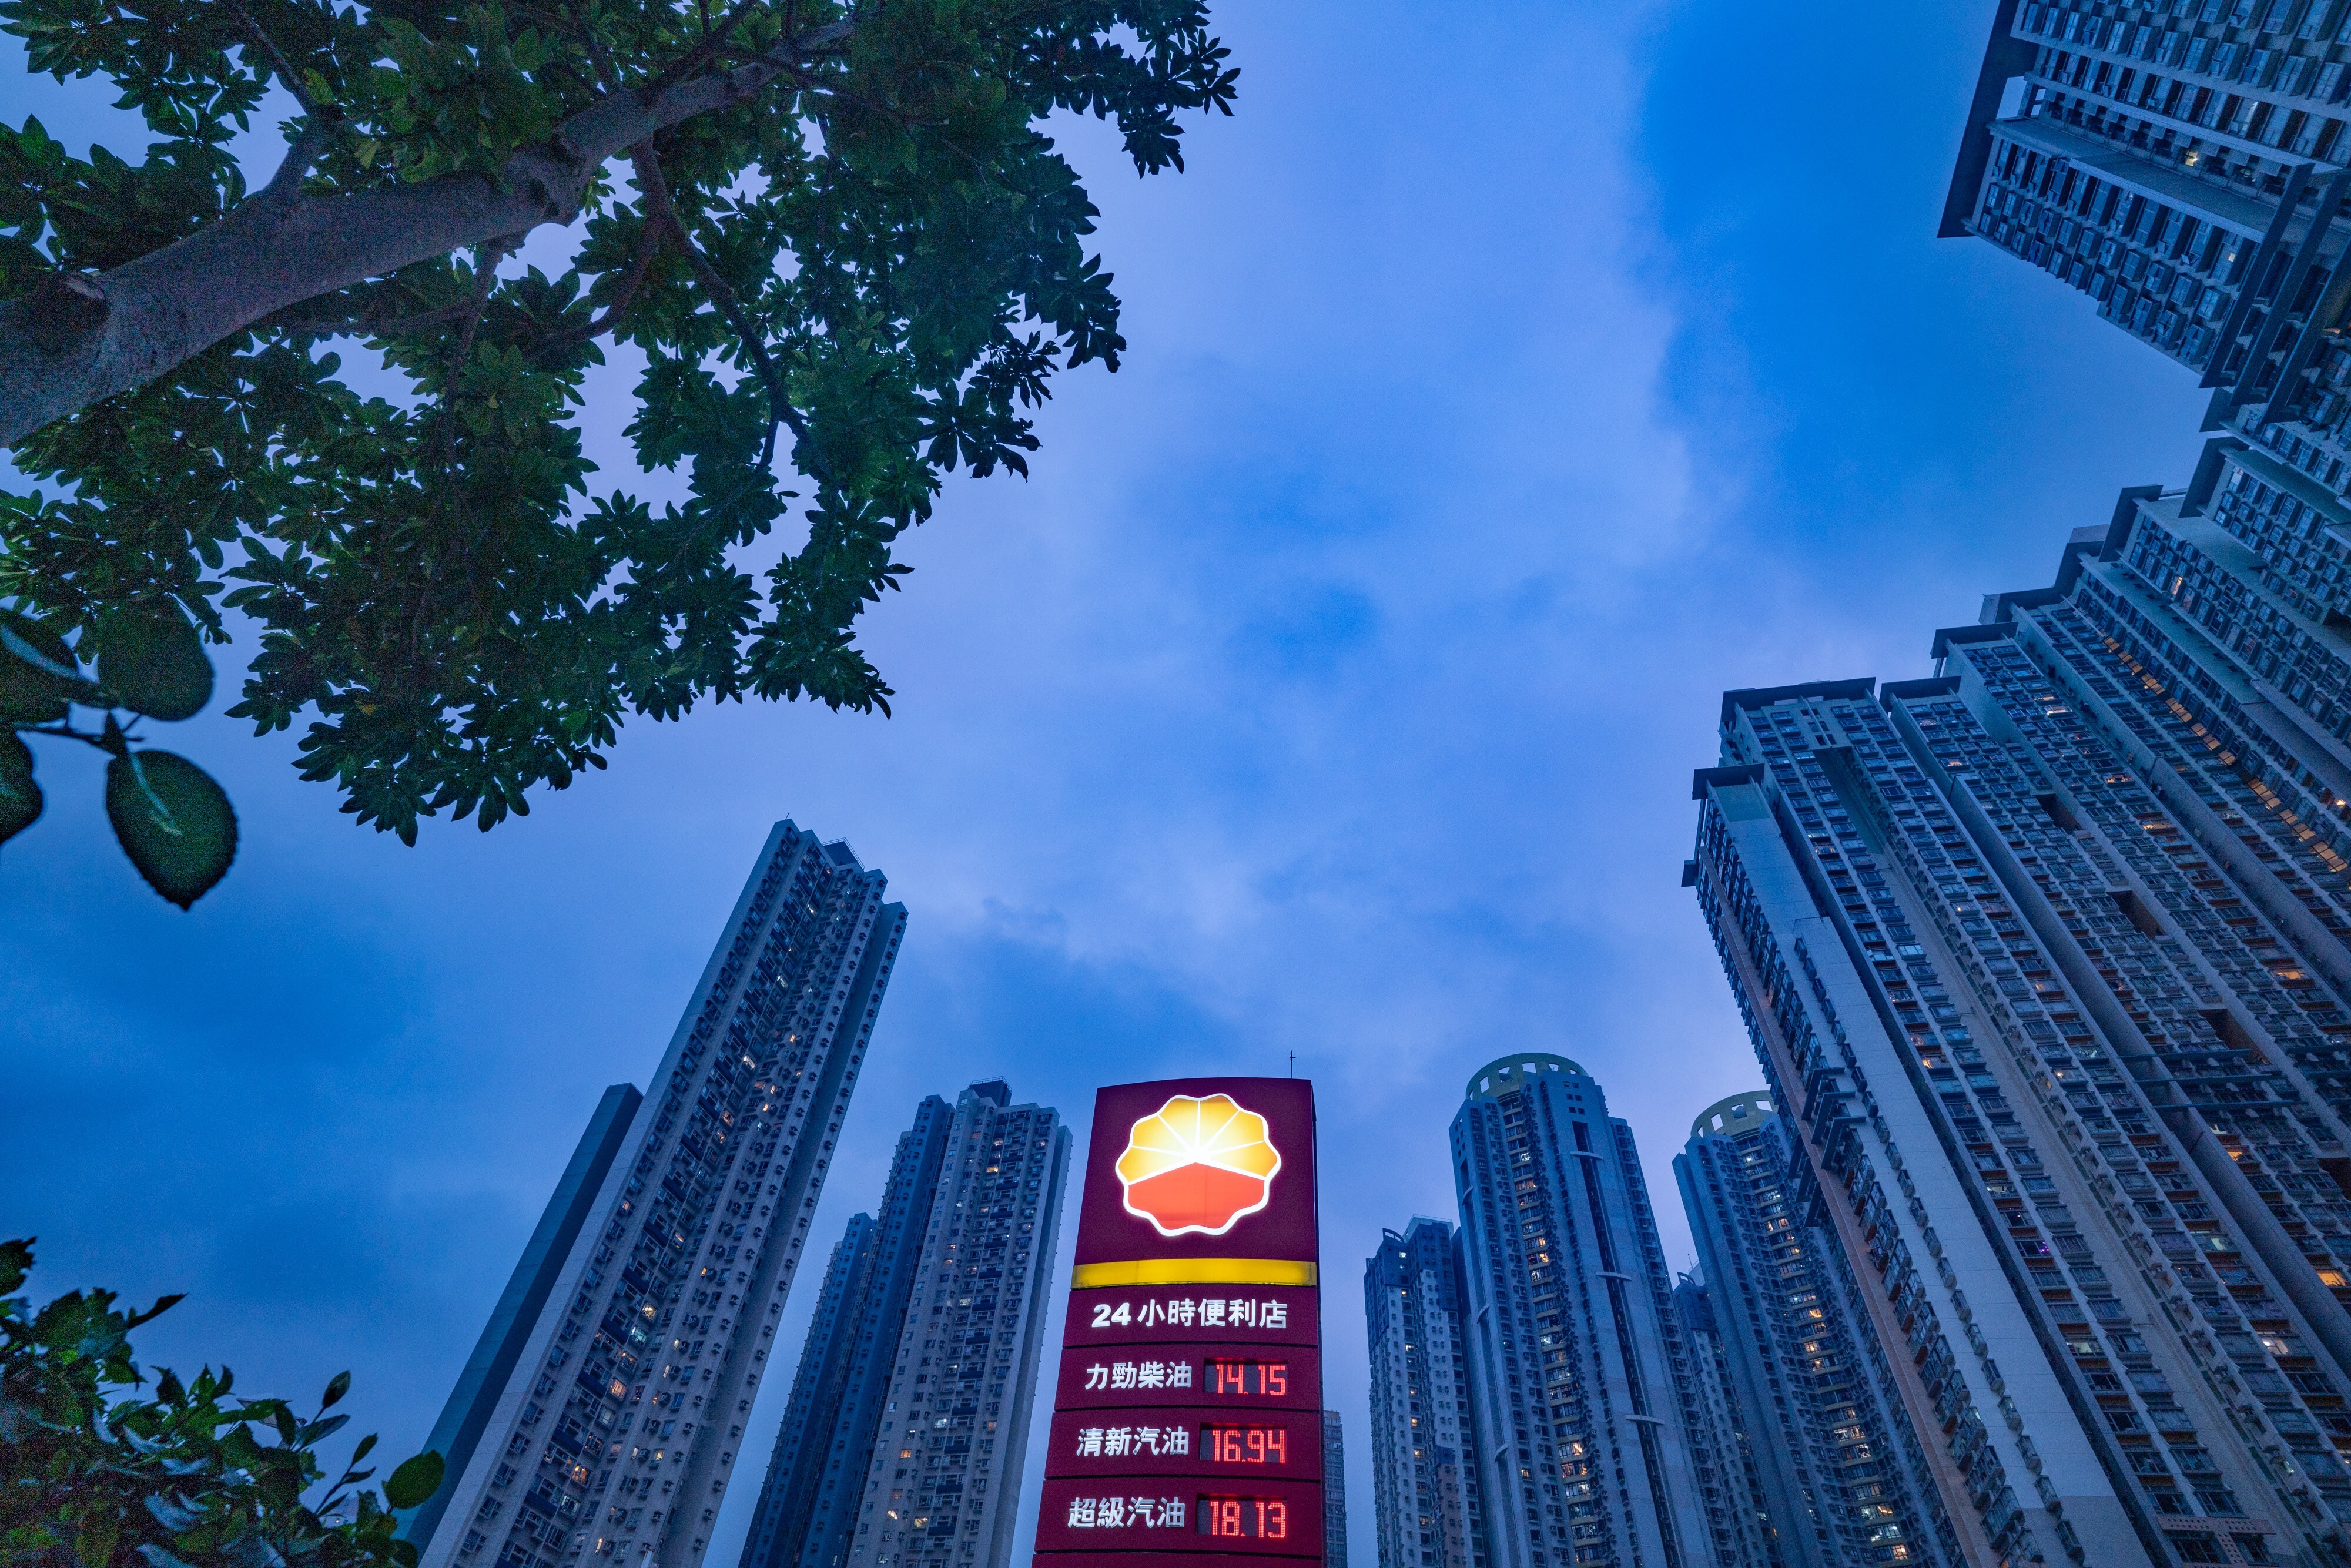 Fuel prices are displayed at a PetroChina petrol station in Hong Kong. PetroChina is the most aggressive of the five fuel retailers in the city, spending HK$3.75 billion for 11 sites sold by government tender since April 2009. Photo: Bloomberg